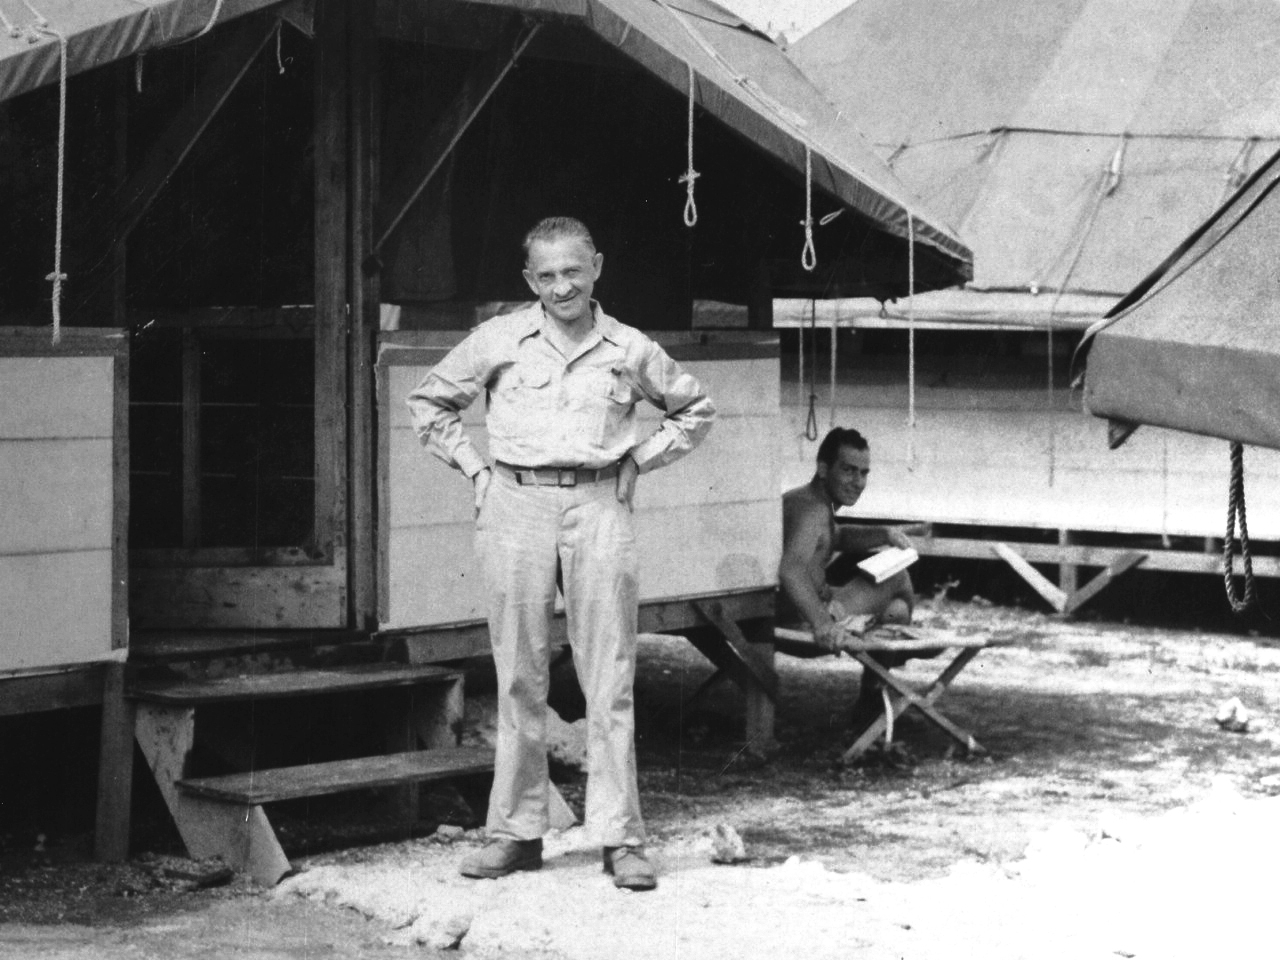 William Laurence in front of a hut on Tinian, Mariana Islands, Aug 1945. TSgt Jesse Kupferberg is at right on the cot.